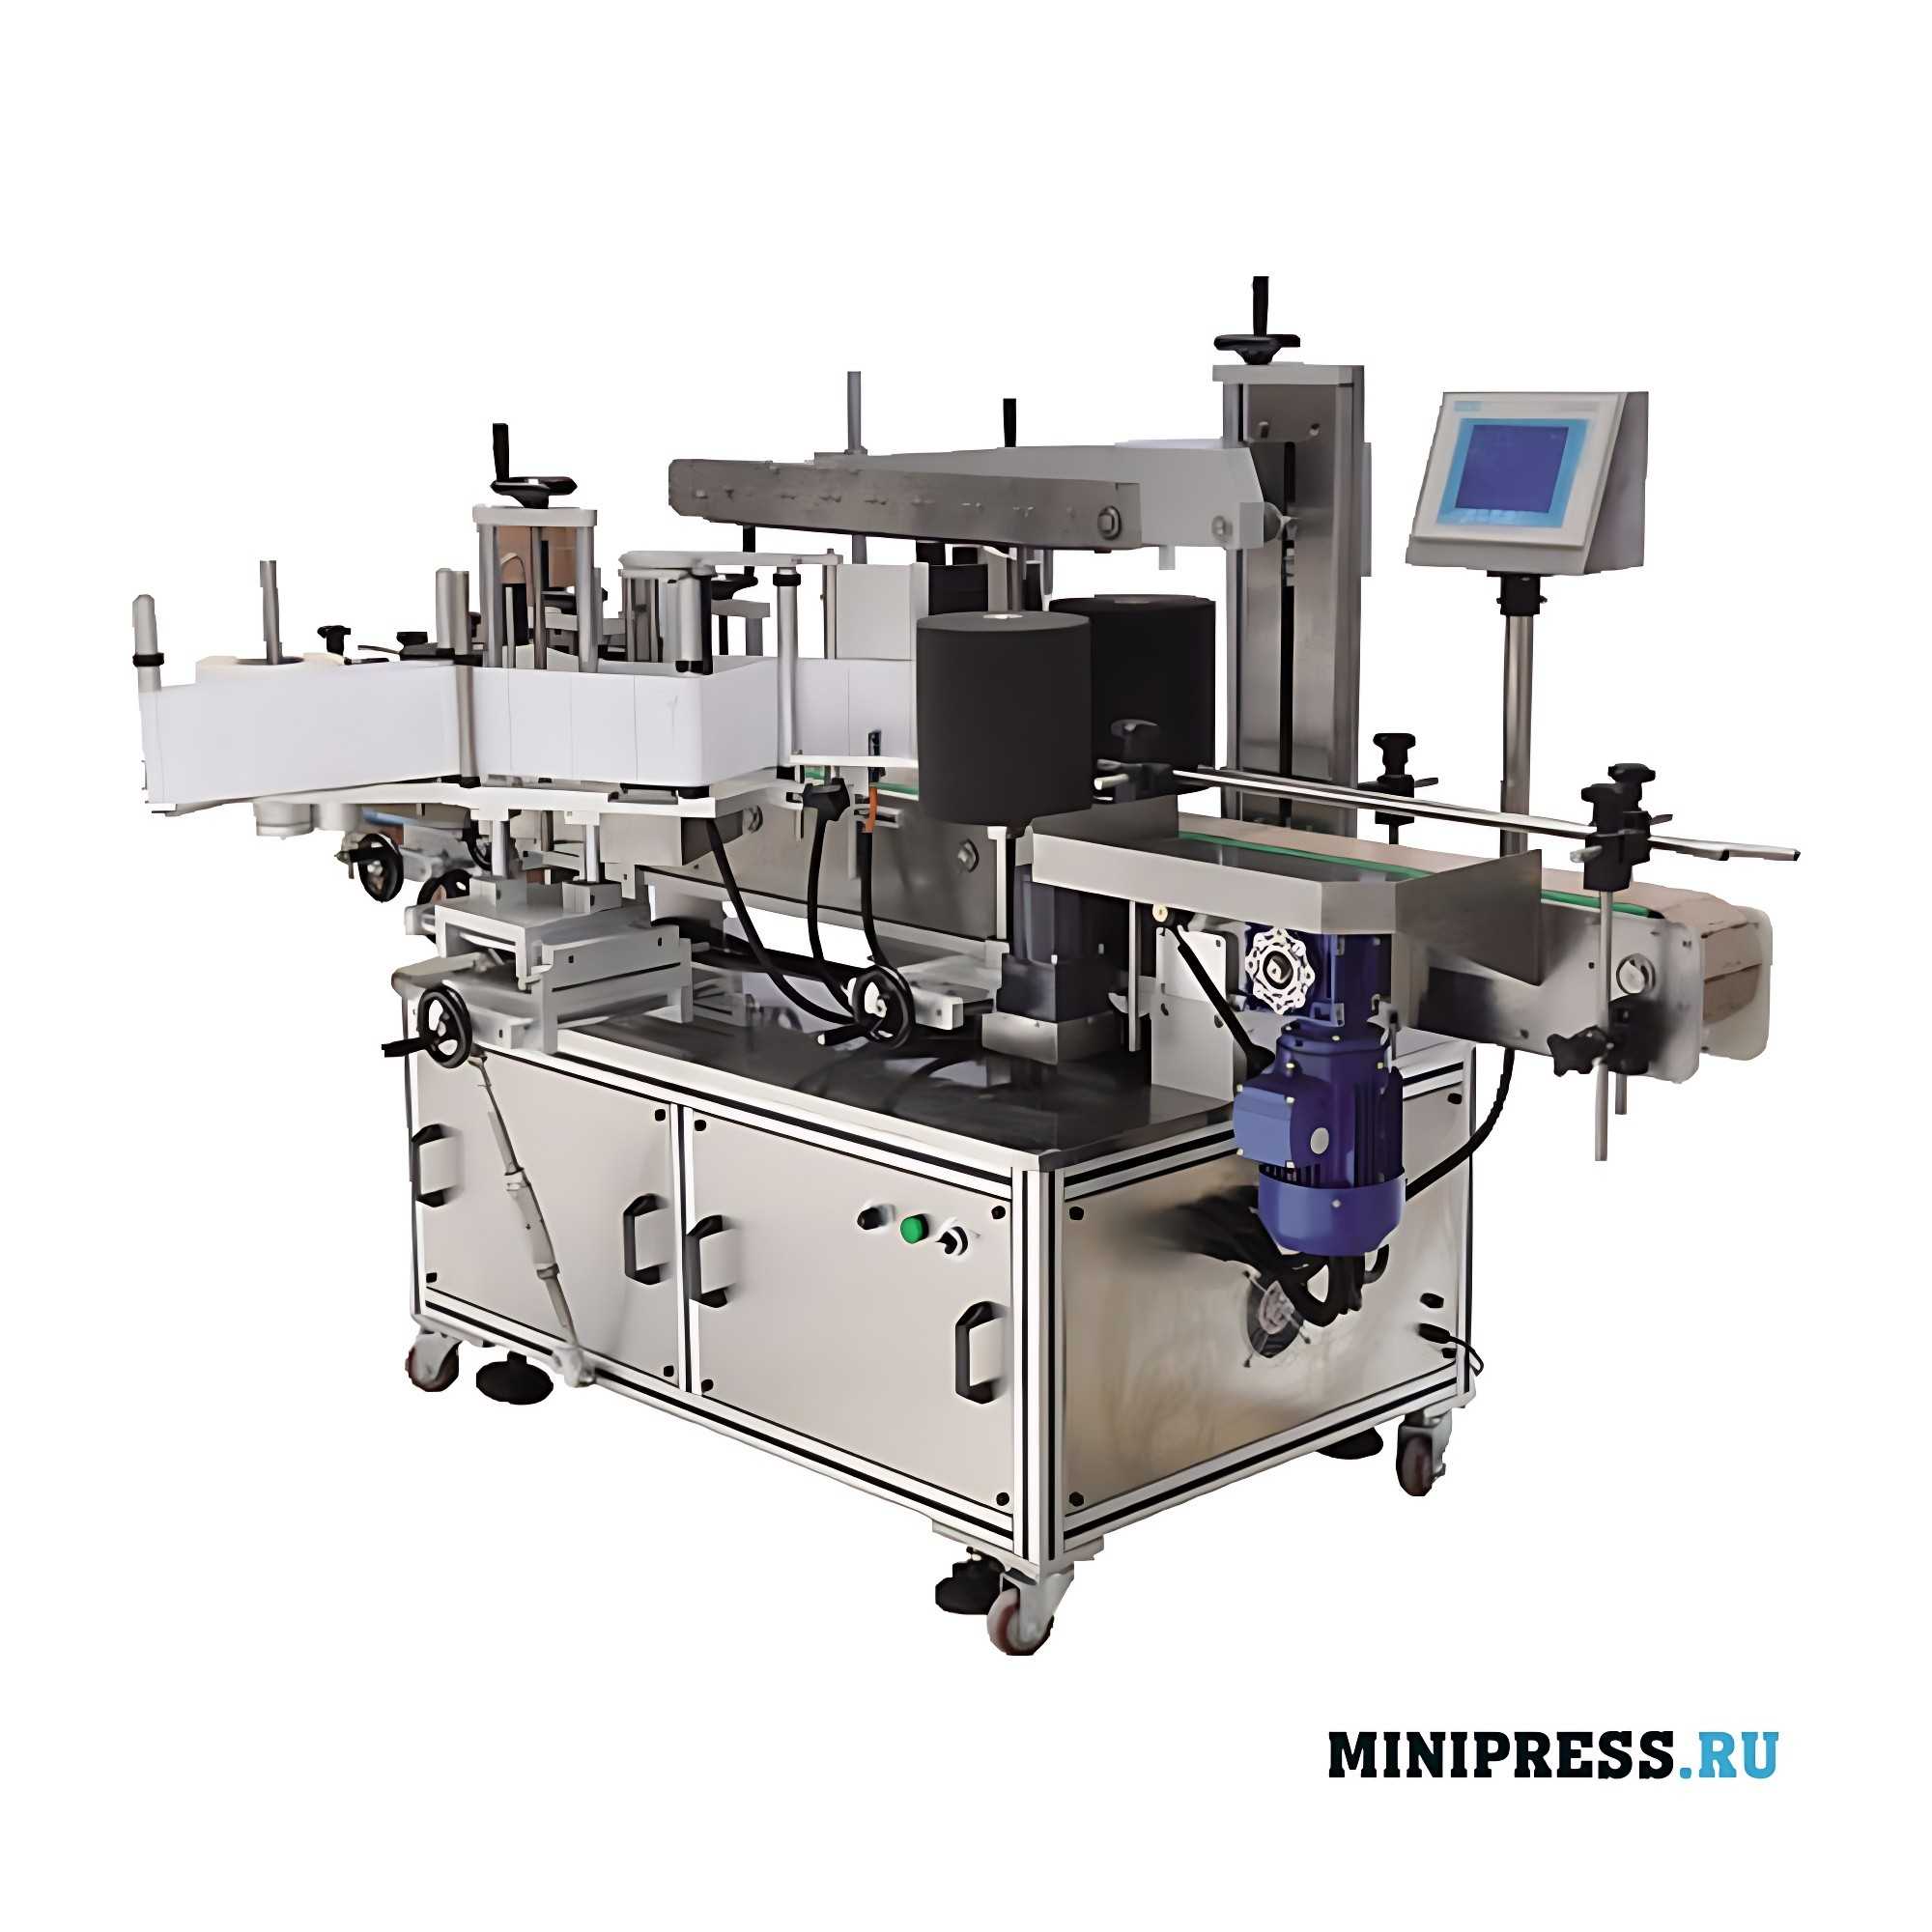 Double-sided labeling equipment NPE 23